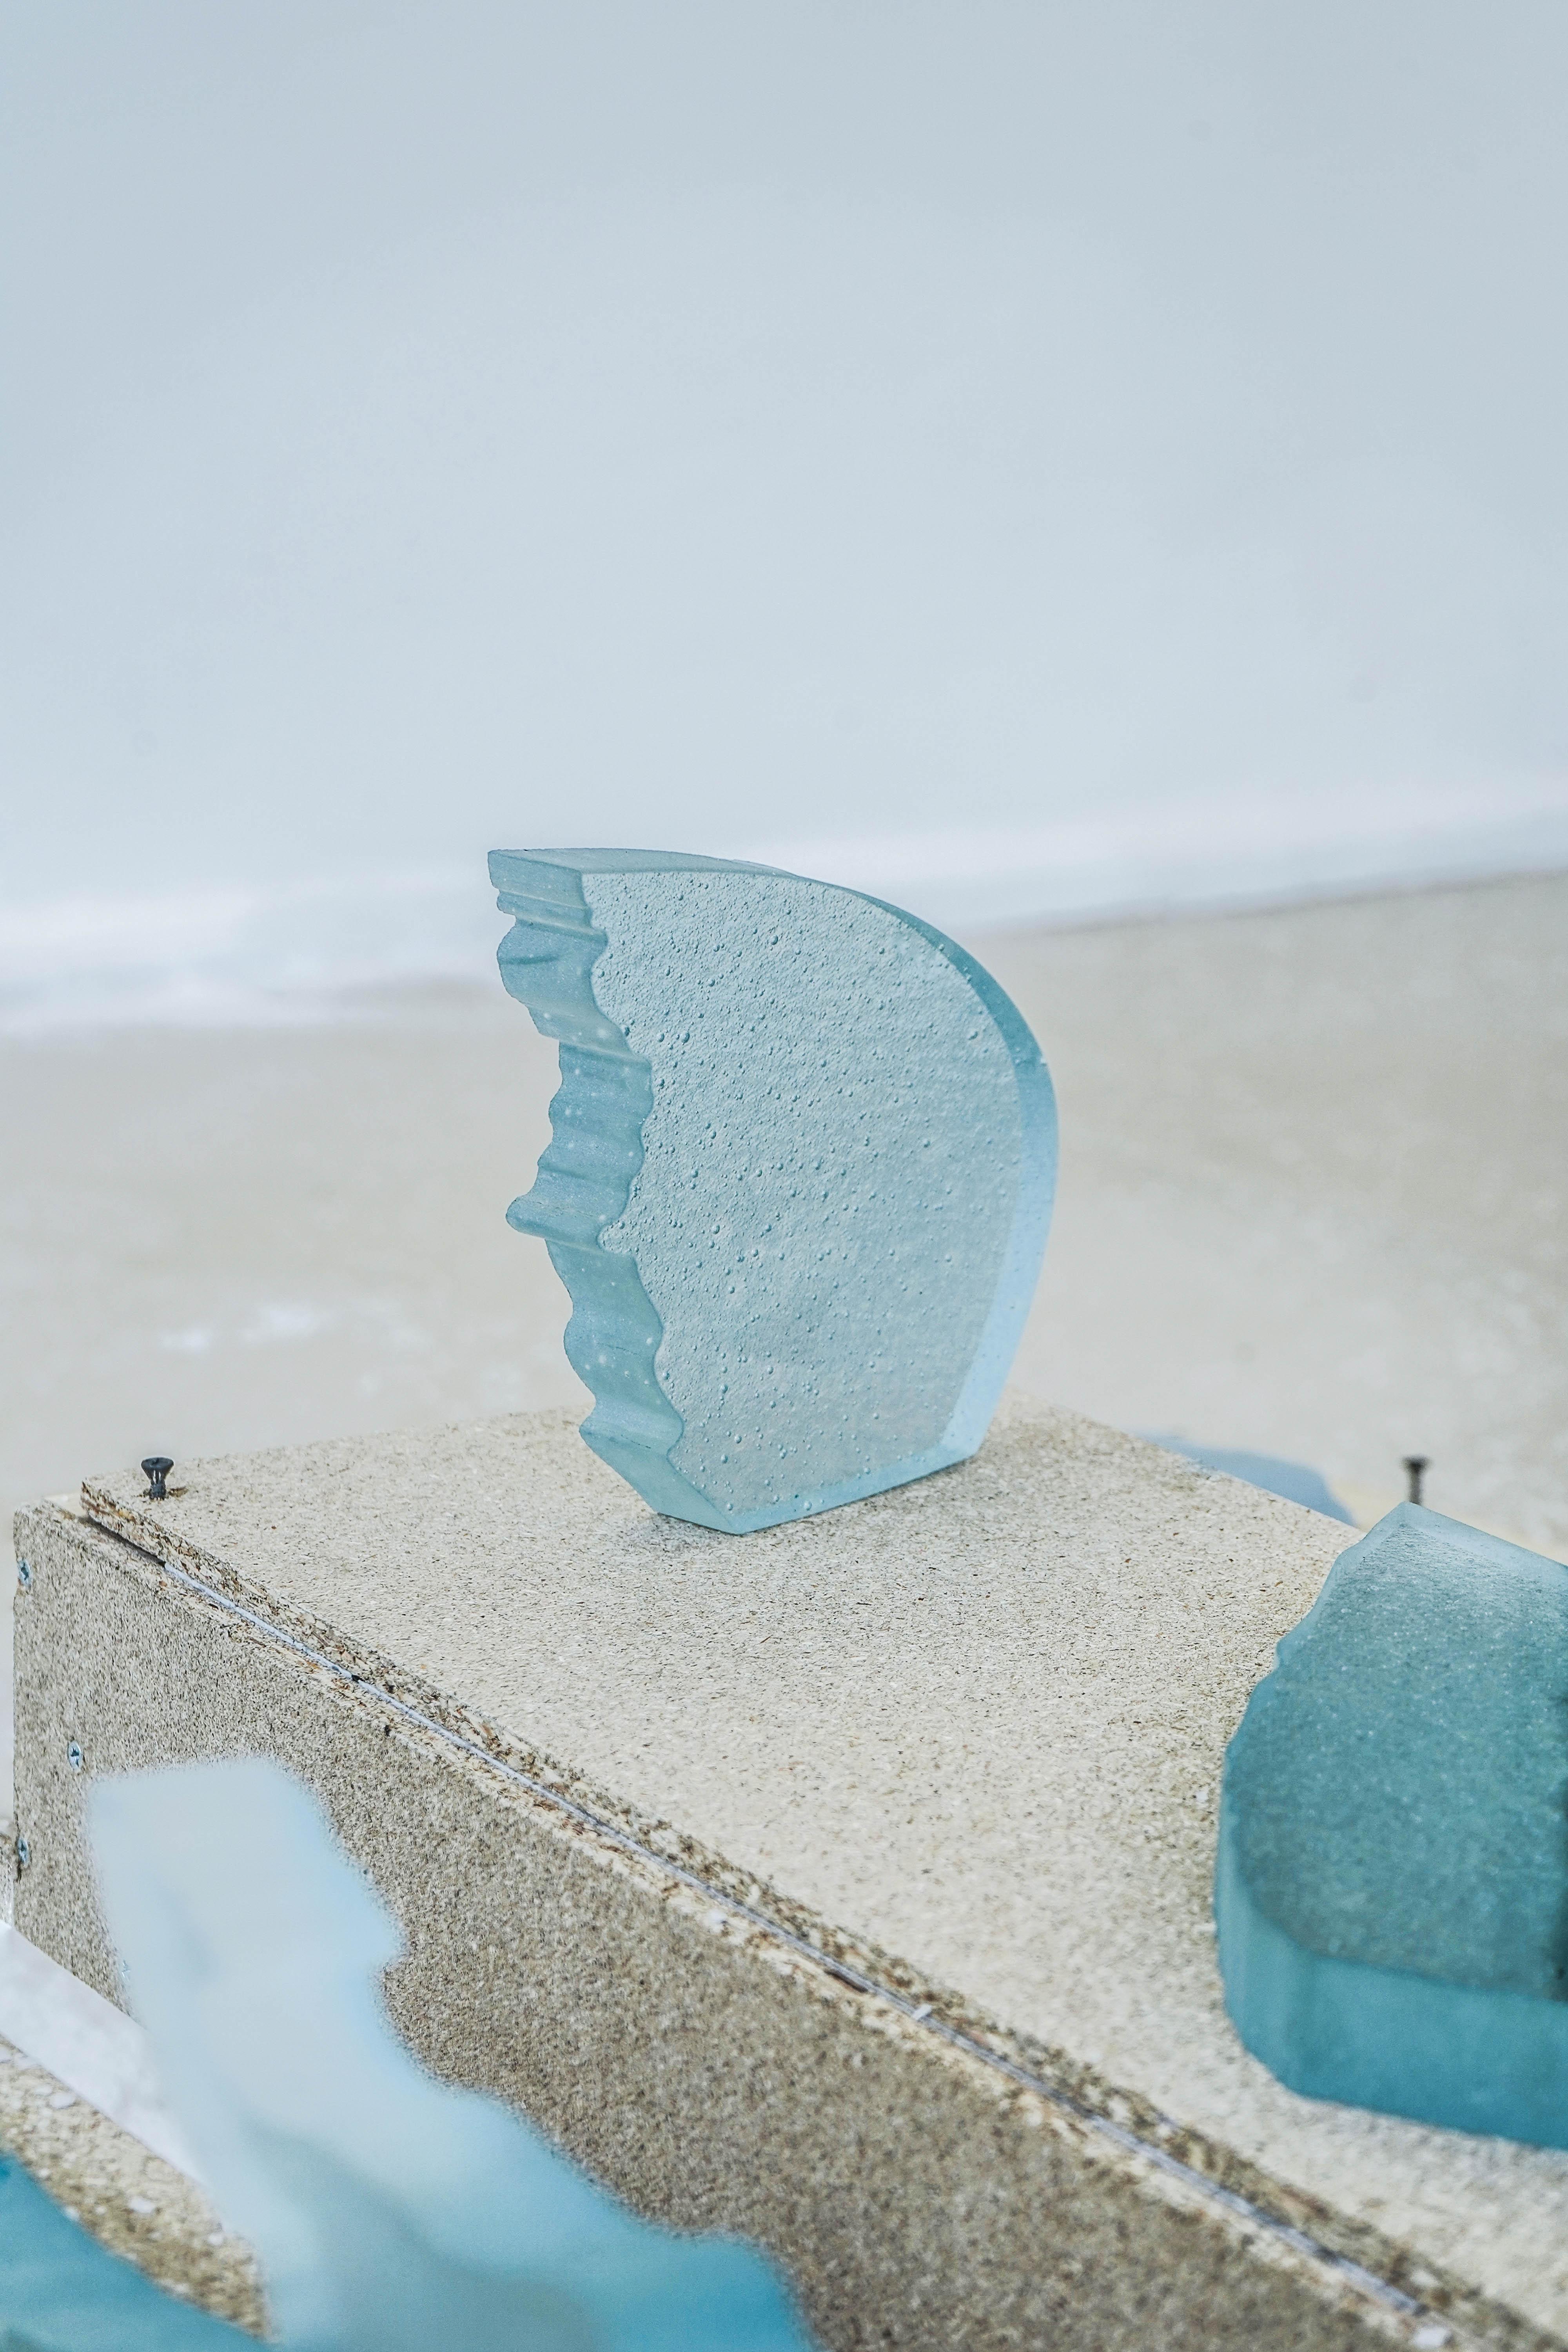 Ross Sea (2022). Casted glass. 13x17x2.5 cm 